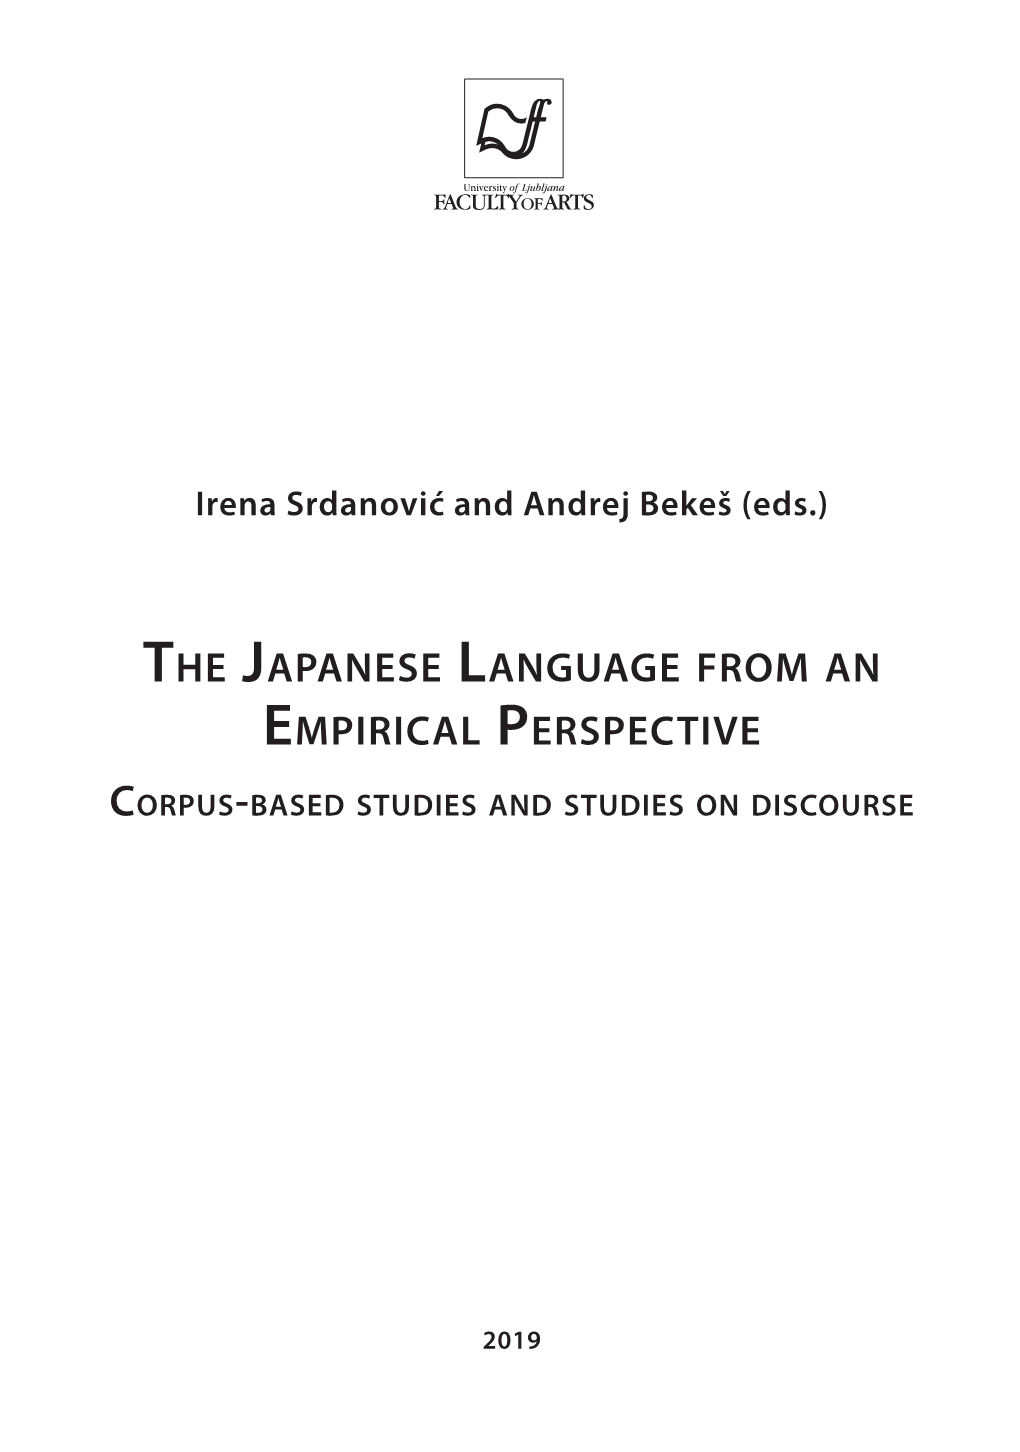 The Japanese Language from an Empirical Perspective Corpus-Based Studies and Studies on Discourse